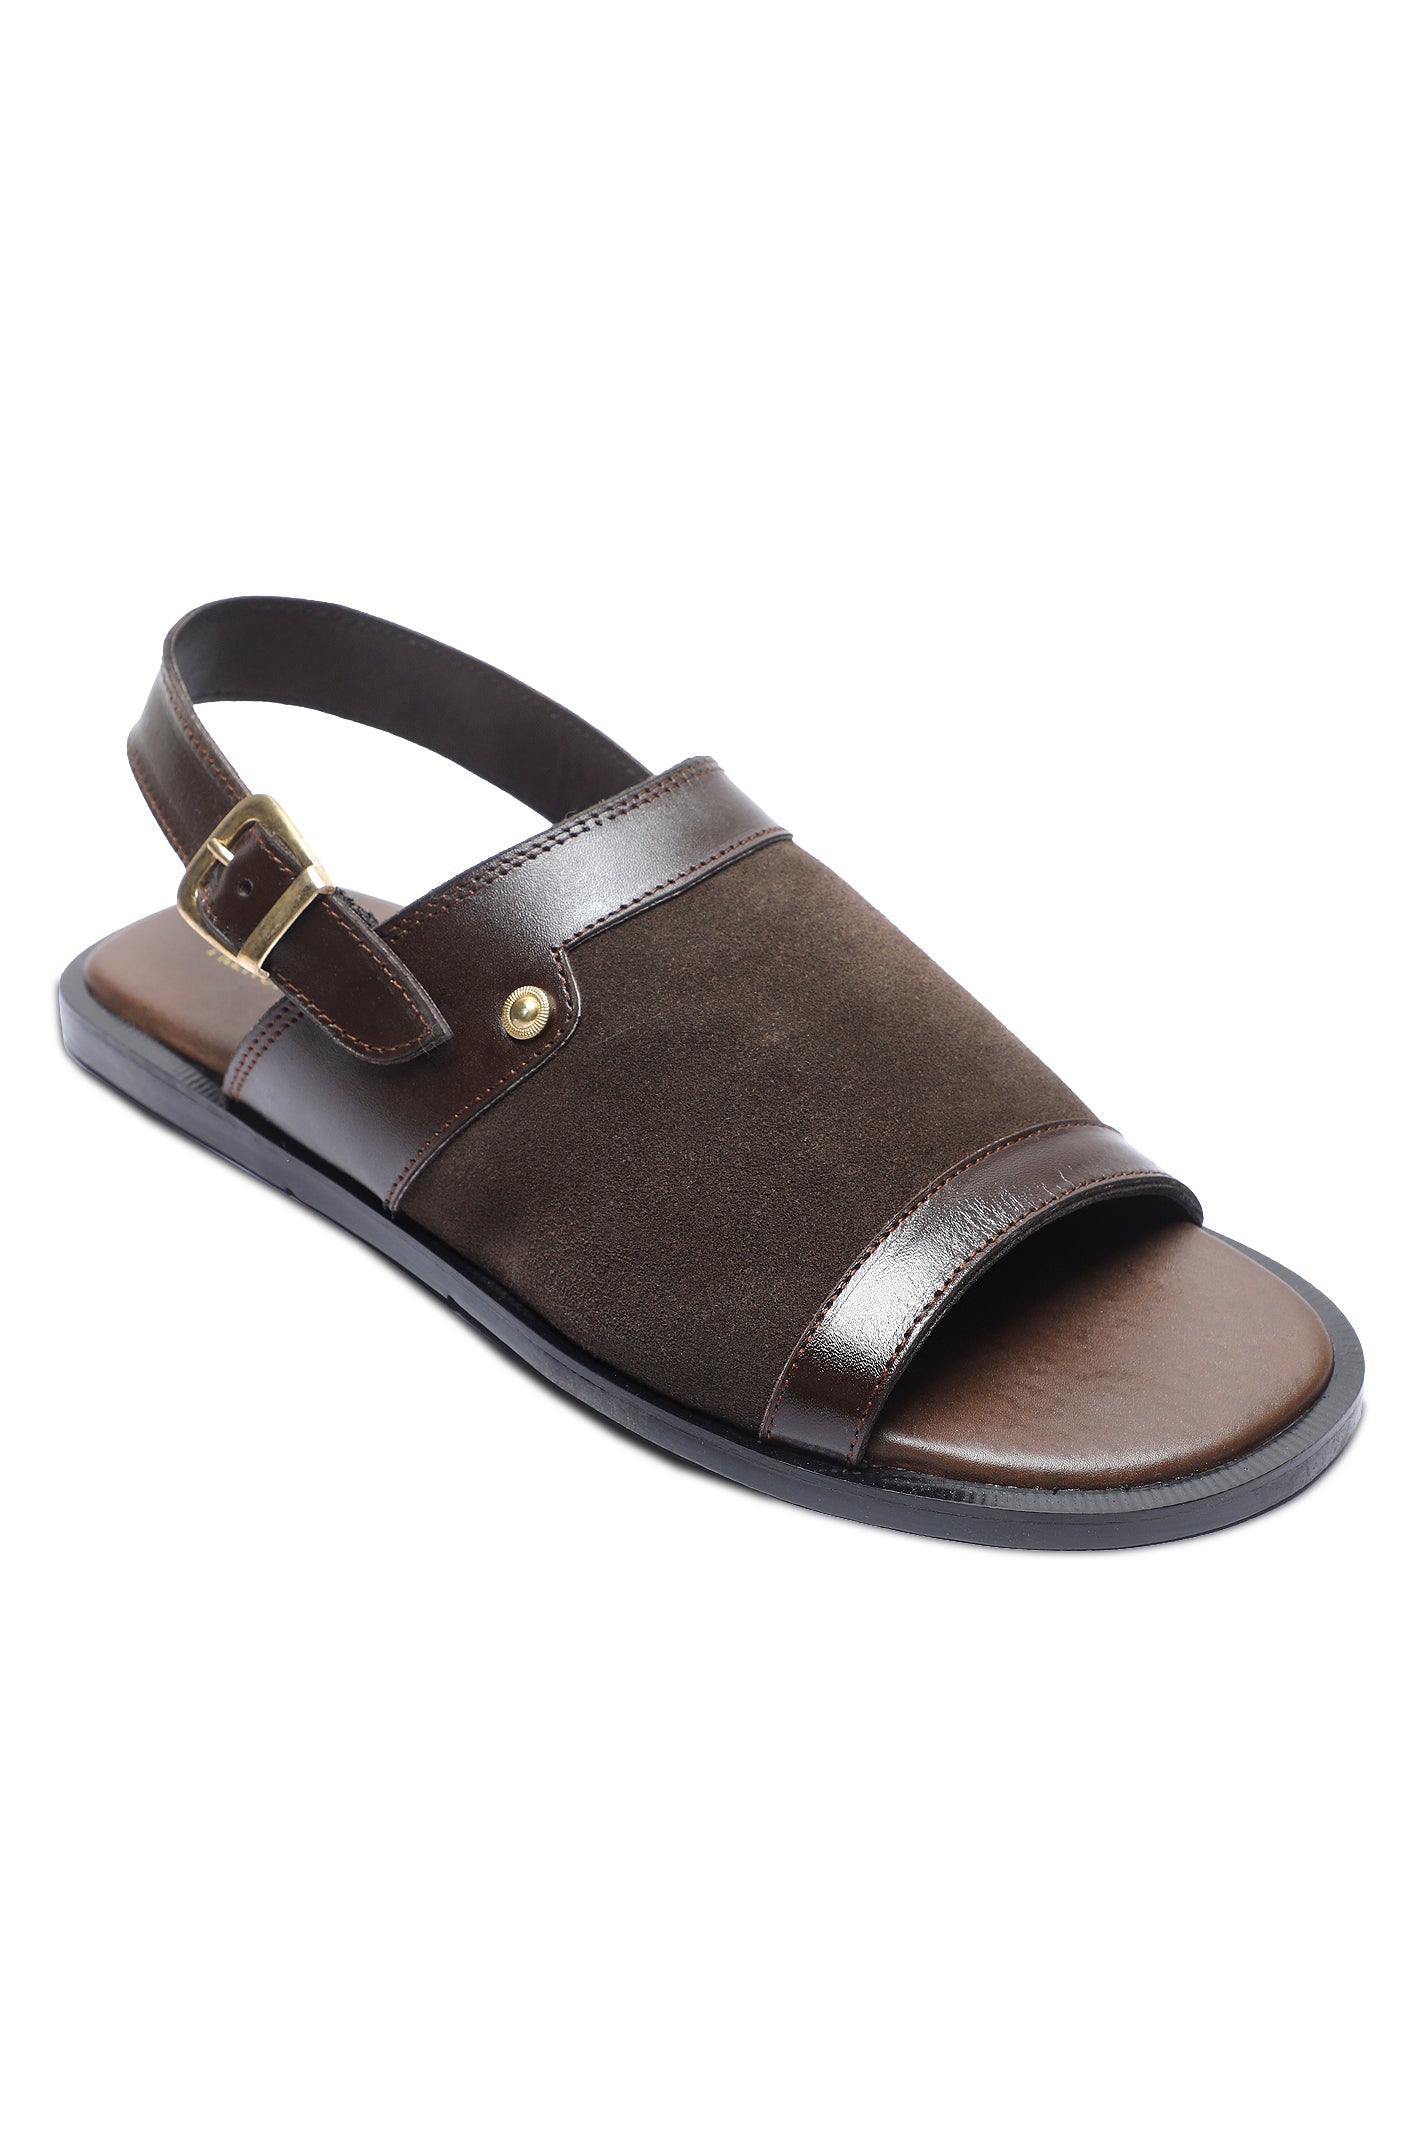 French Emporio Men's Sandal SKU: SLD-0041-COFFEE - Diners